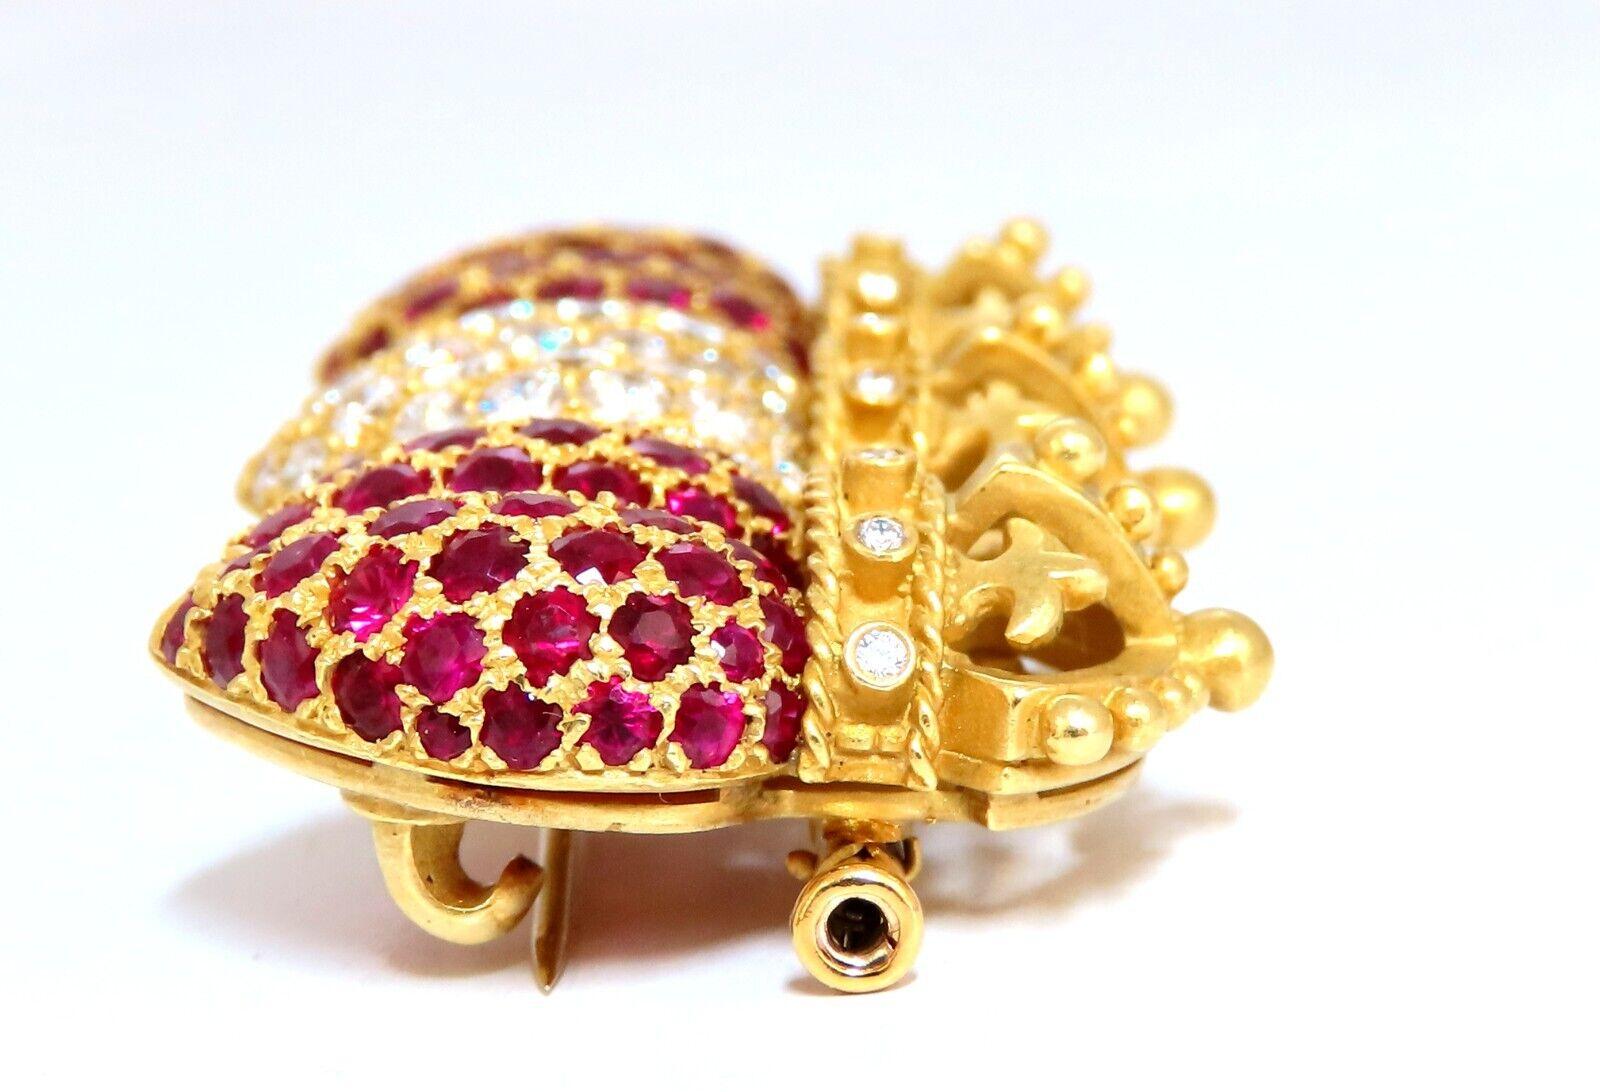 Designer B. Kieselstein Three Crown Pin



3.50ct natural diamonds

G-color Vs2 Clarity

4.00ct natural Rubies

2.1 x 1.1 inch 

Handmade 

18kt. yellow gold 

30 Grams.

$19000 Appraisal to accompany